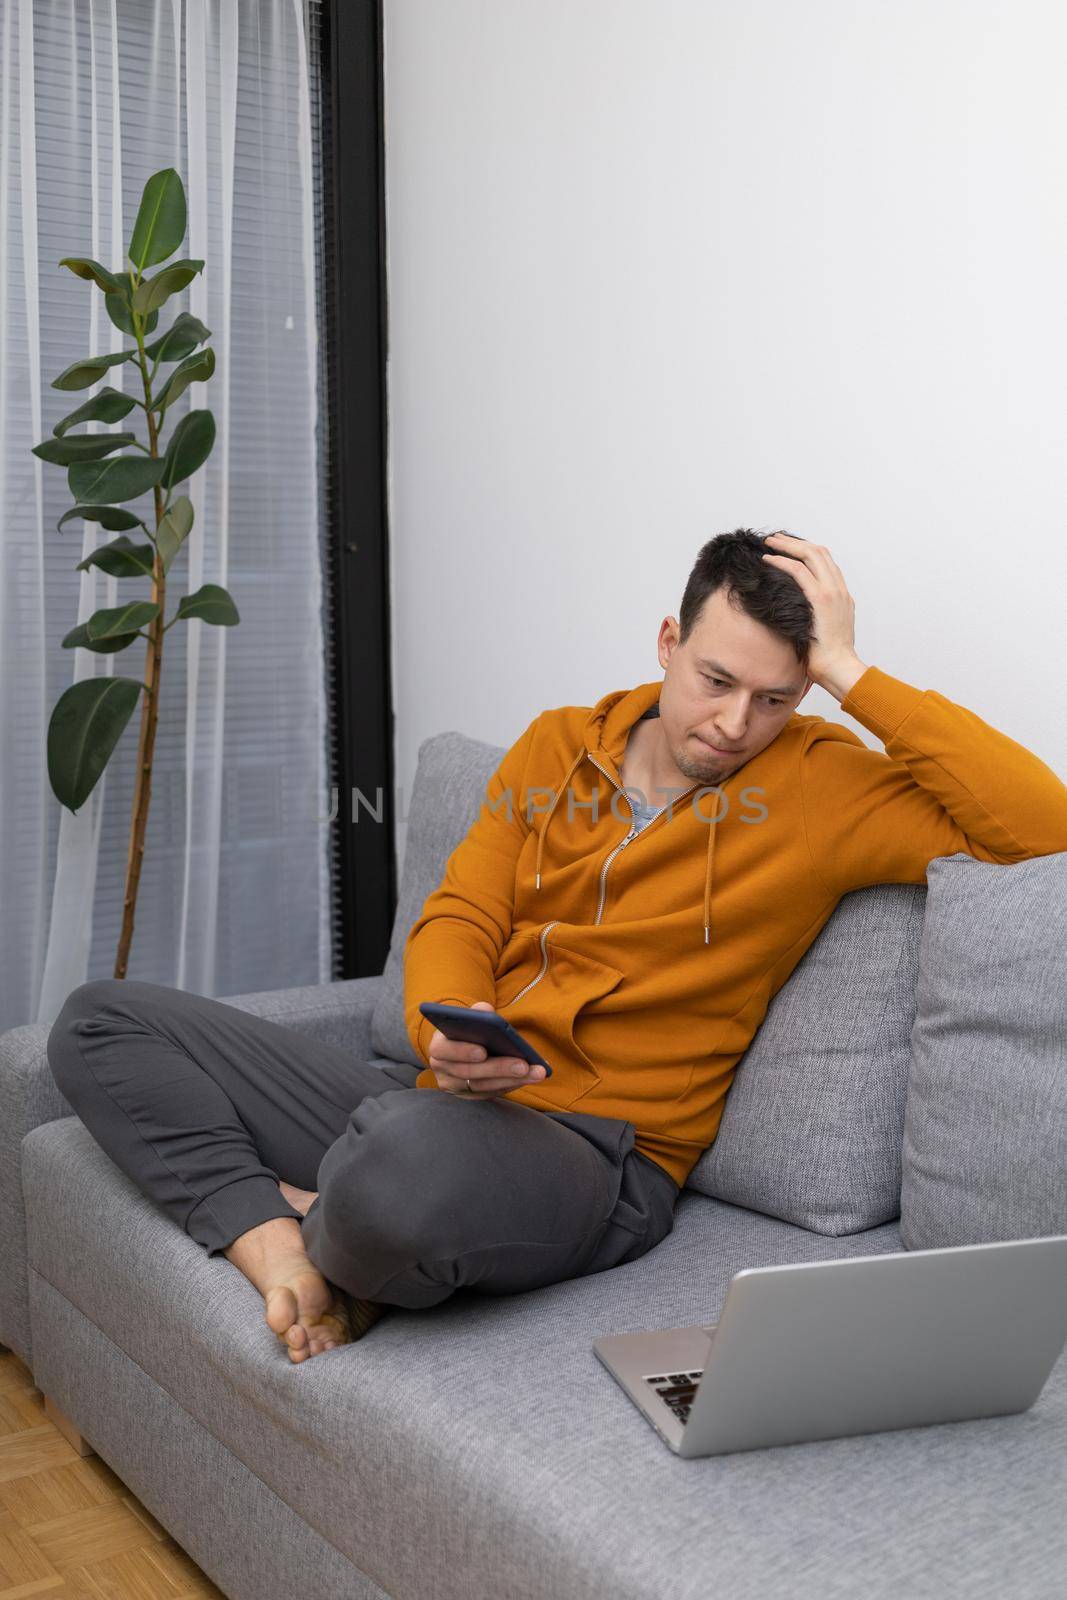 young man watching at mobile phone playing game by Chechotkin